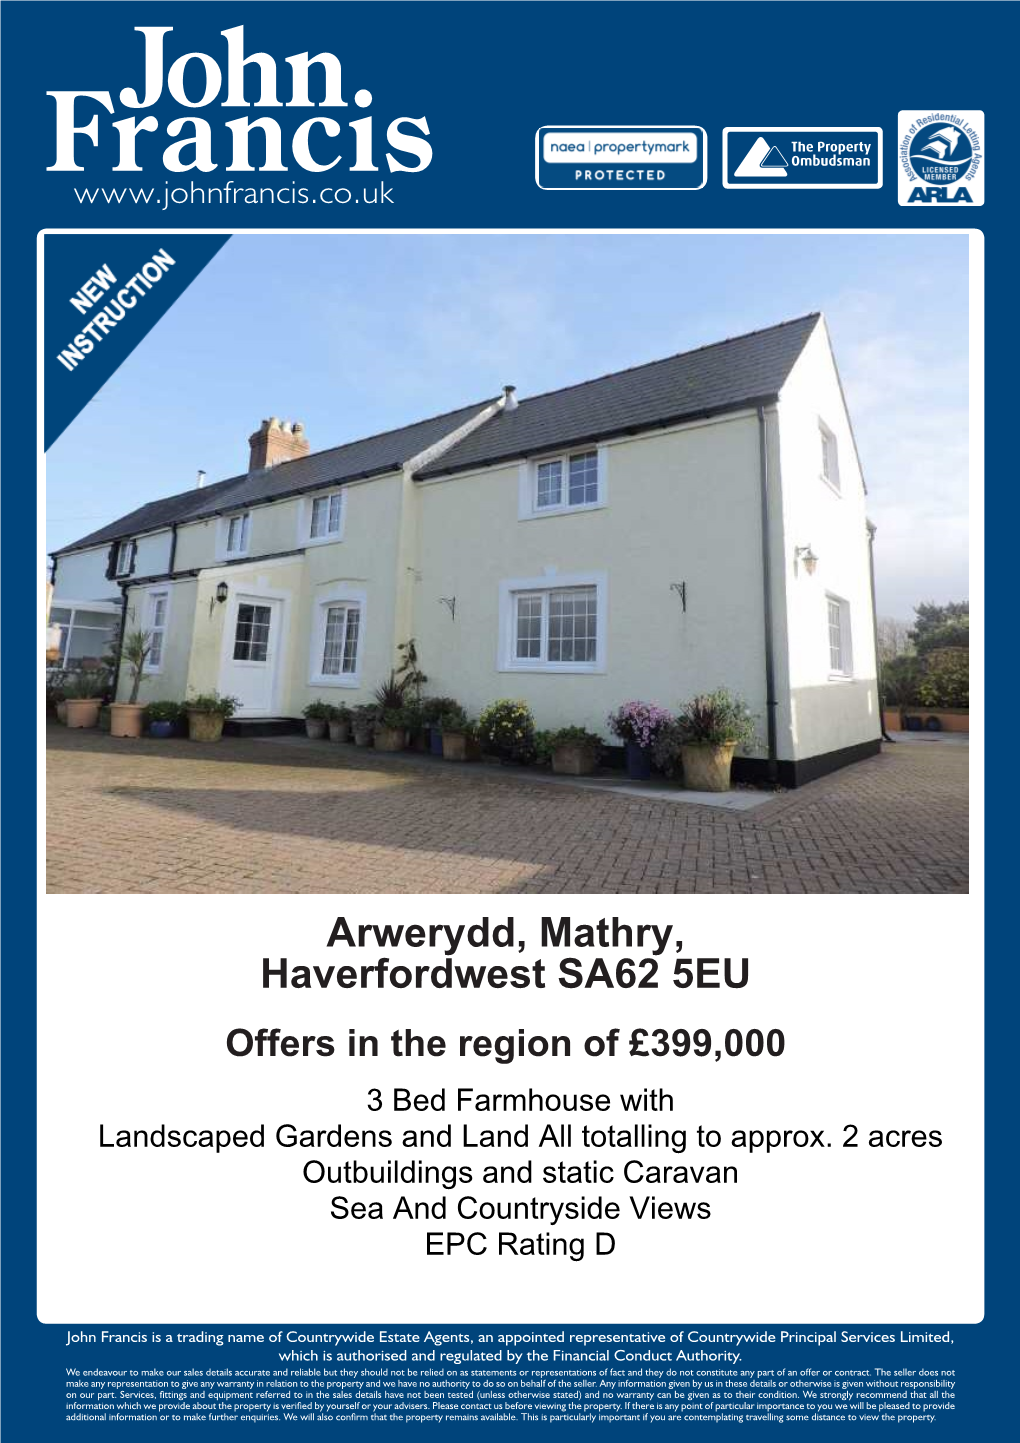 Arwerydd, Mathry, Haverfordwest SA62 5EU Offers in the Region of £399,000 • 3 Bed Farmhouse with • Landscaped Gardens and Land All Totalling to Approx